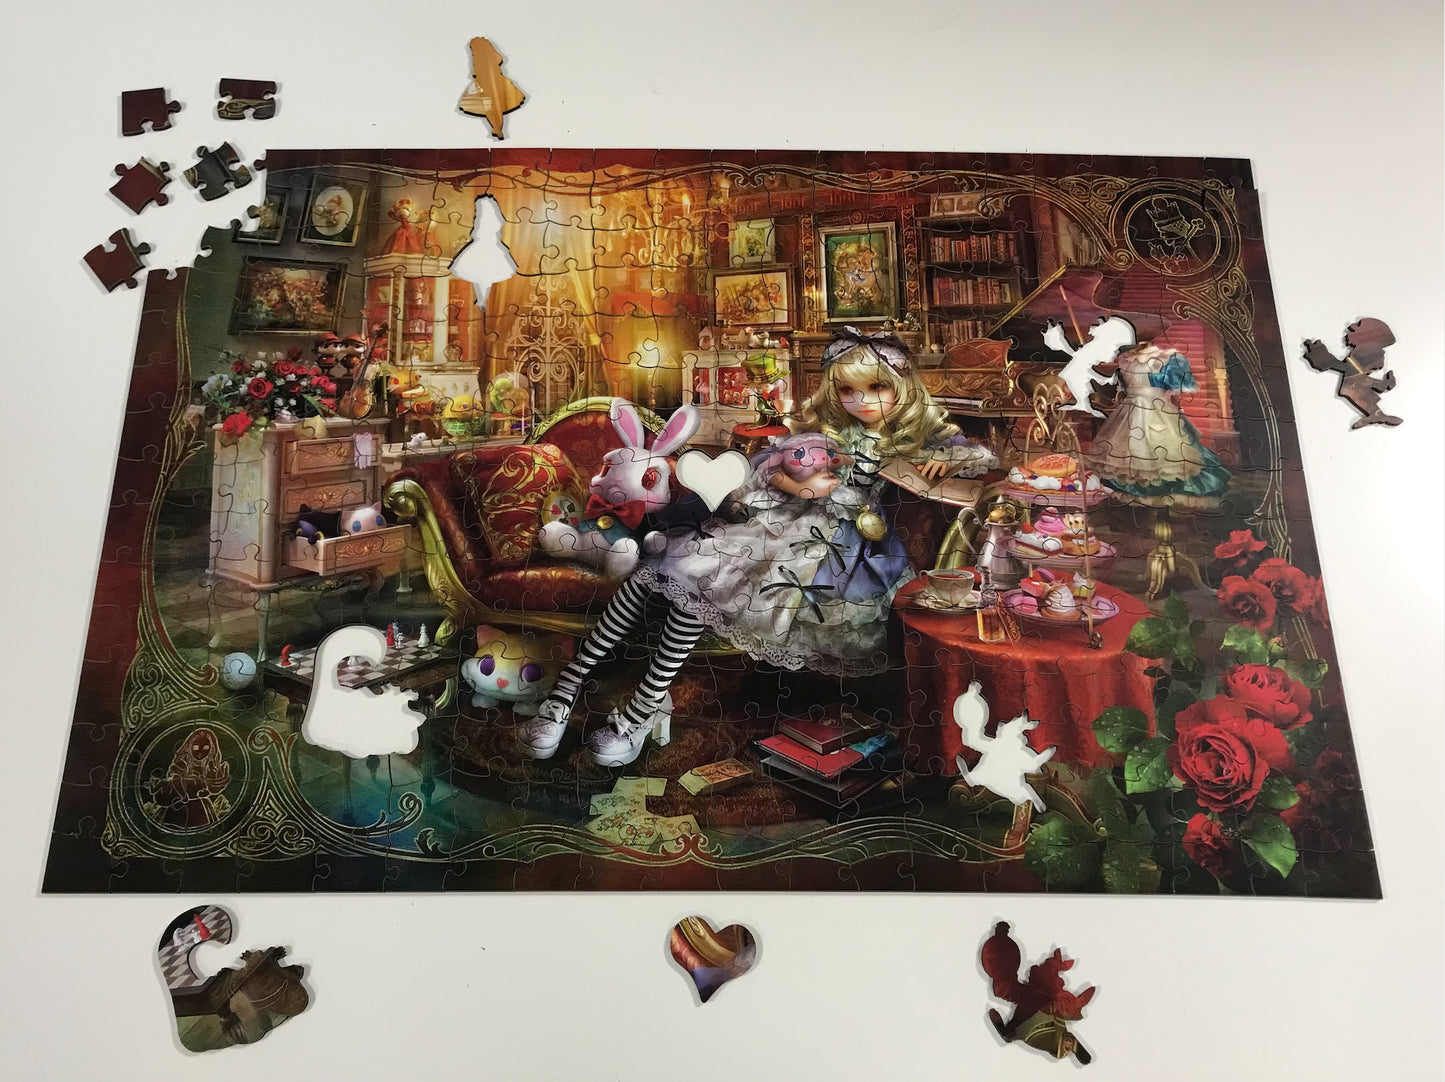 Alice Collection by Shu. 300 Piece Wooden Puzzle